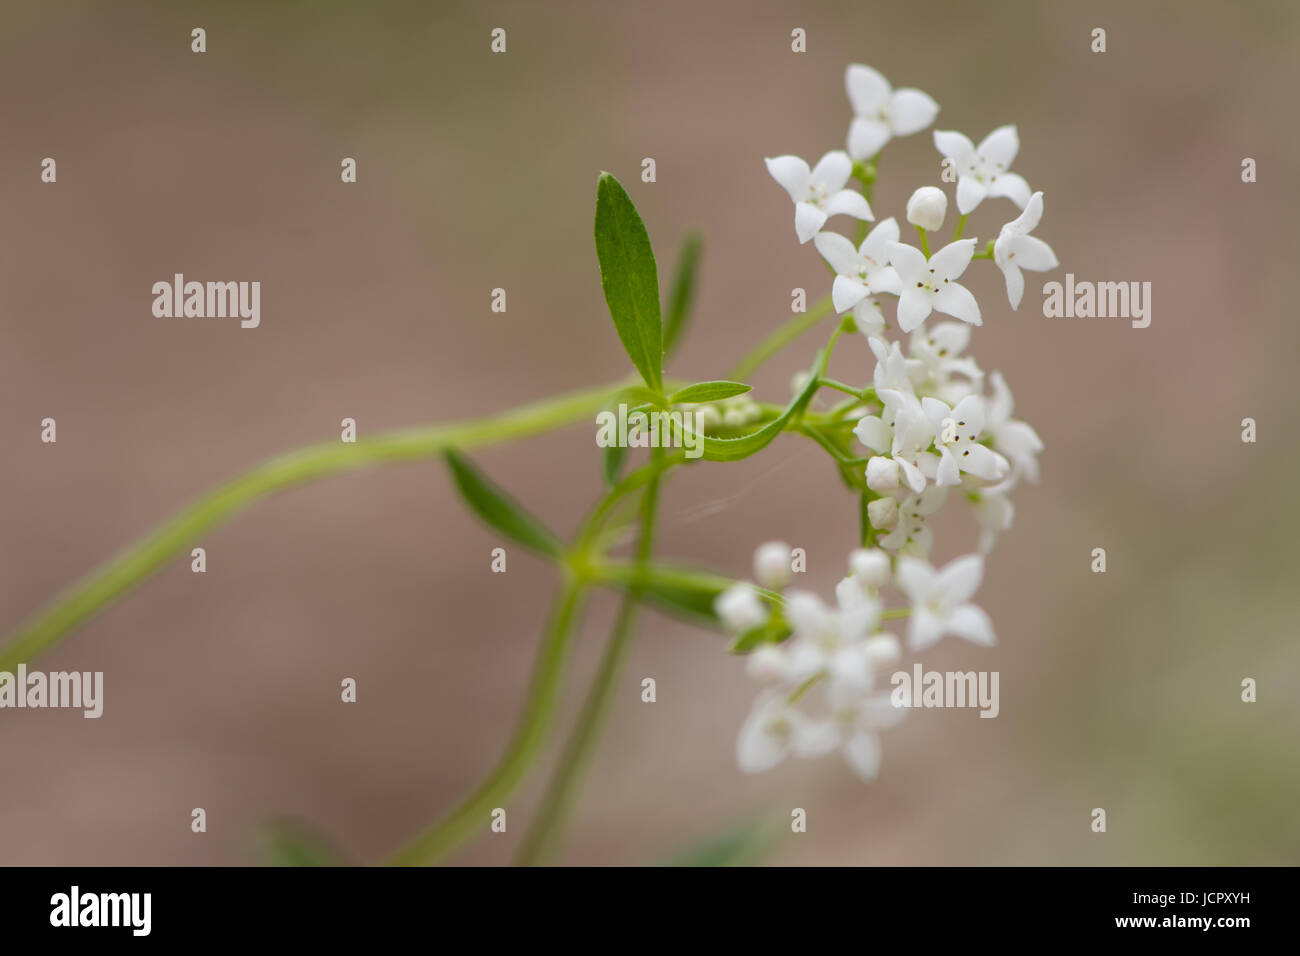 Marsh bedstraw (Galium palustre) flowers. Lax pyramidal panicle of white flowers on straggly plant in the family Rubiaceae Stock Photo